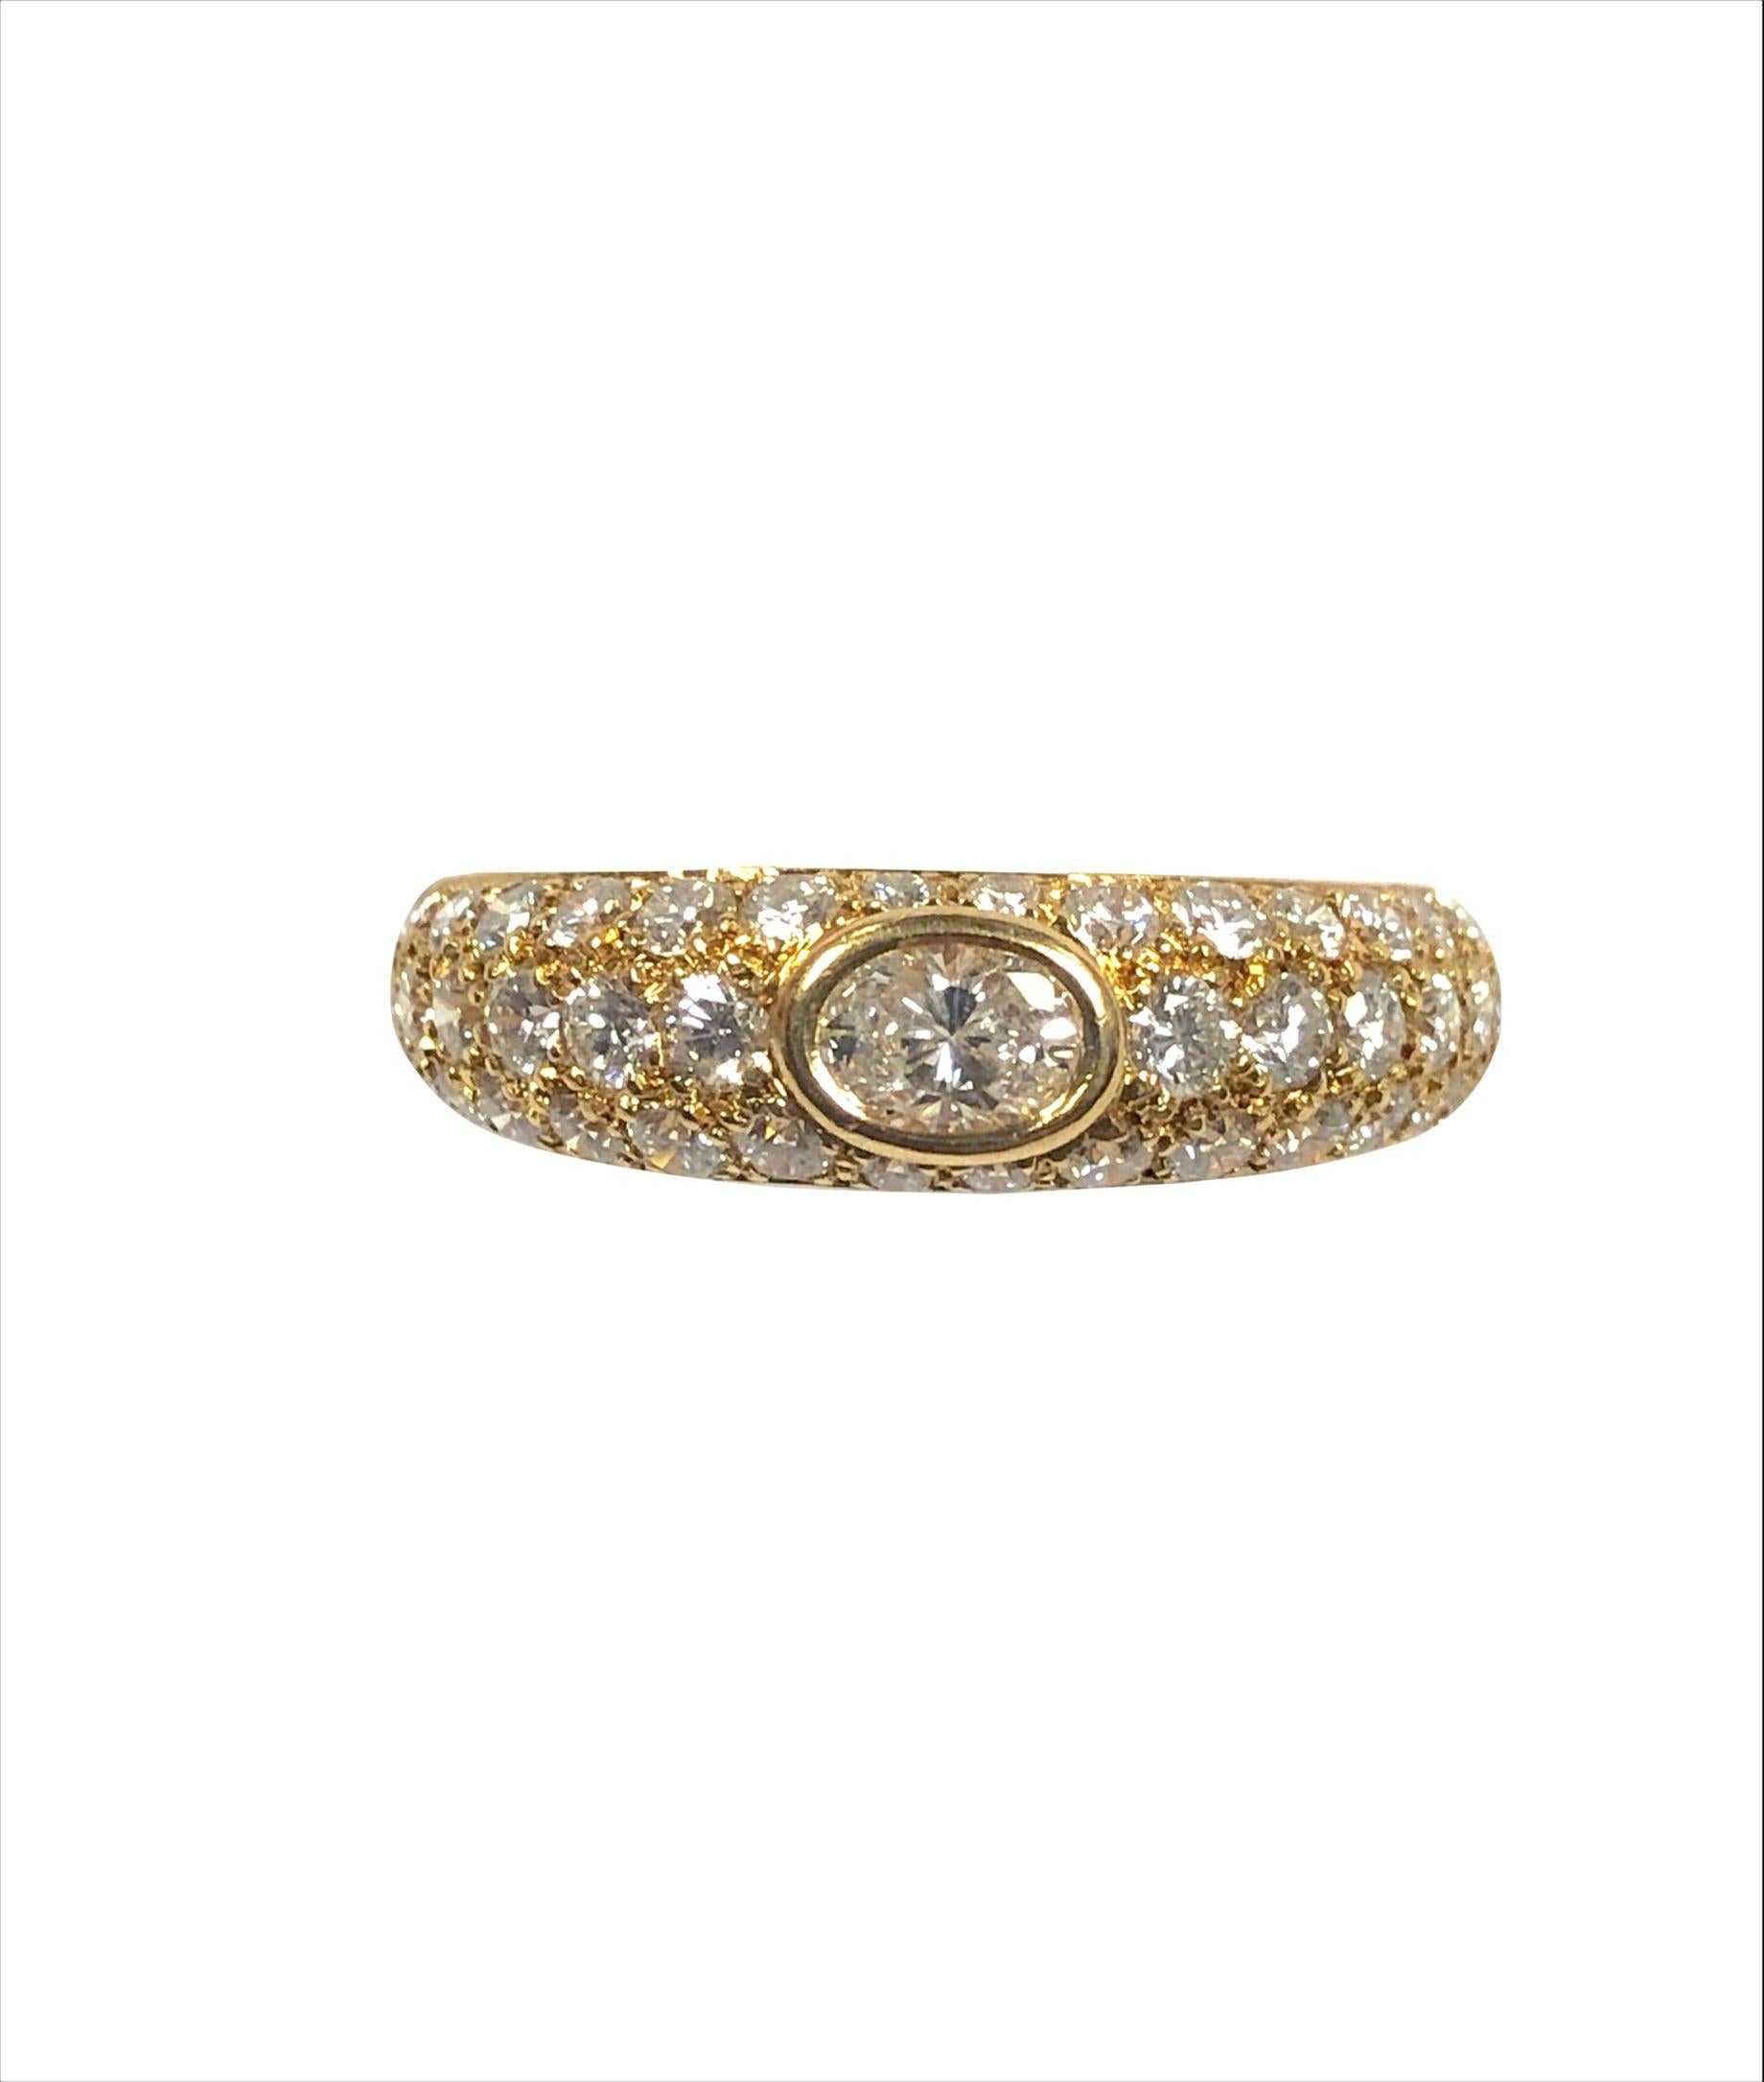 Circa 1990s Cartier 18K Yellow Gold Mimi Collection Ring, Centrally set with a 1/2 carat Oval Diamond and further set with Round Brilliant cut Diamonds totaling approximately 1.40 Carats. Measuring 7/8 inch in length across the top and 1/4 inch